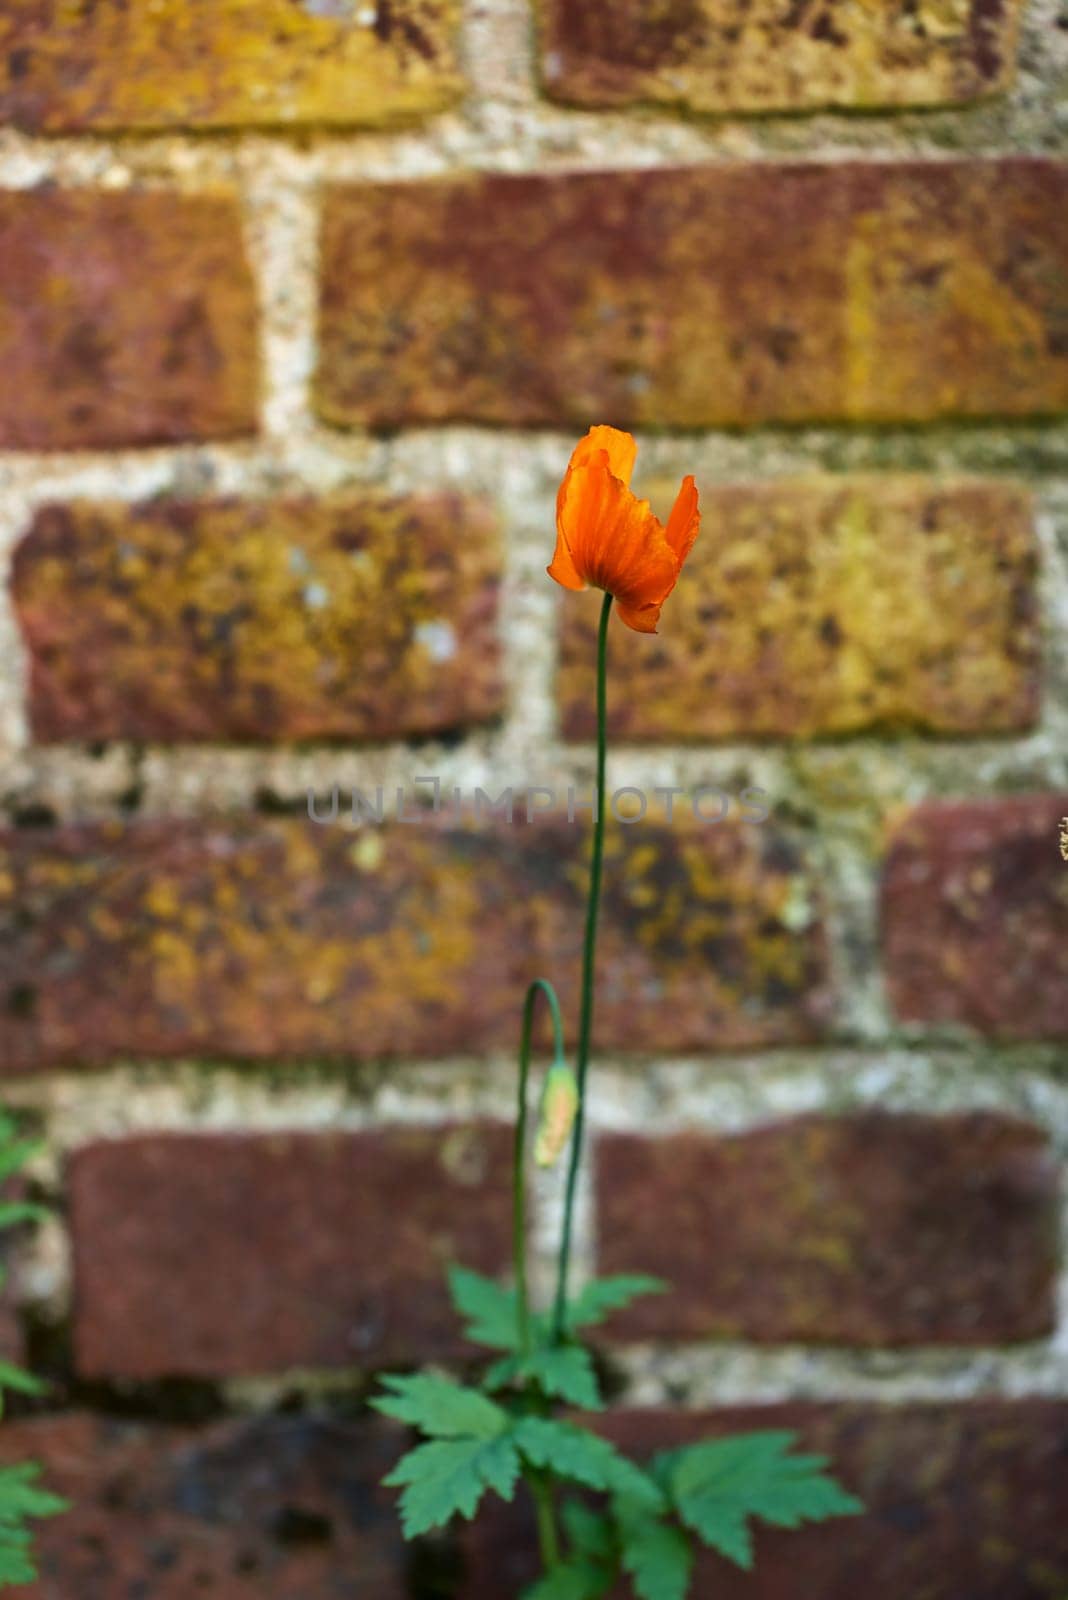 Brick, wall and cement with poppy flower in nature, outside and block with concrete for home build. Masonry, brickwork and weather for outdoor stone architecture, plant or weathered and aged material by YuriArcurs